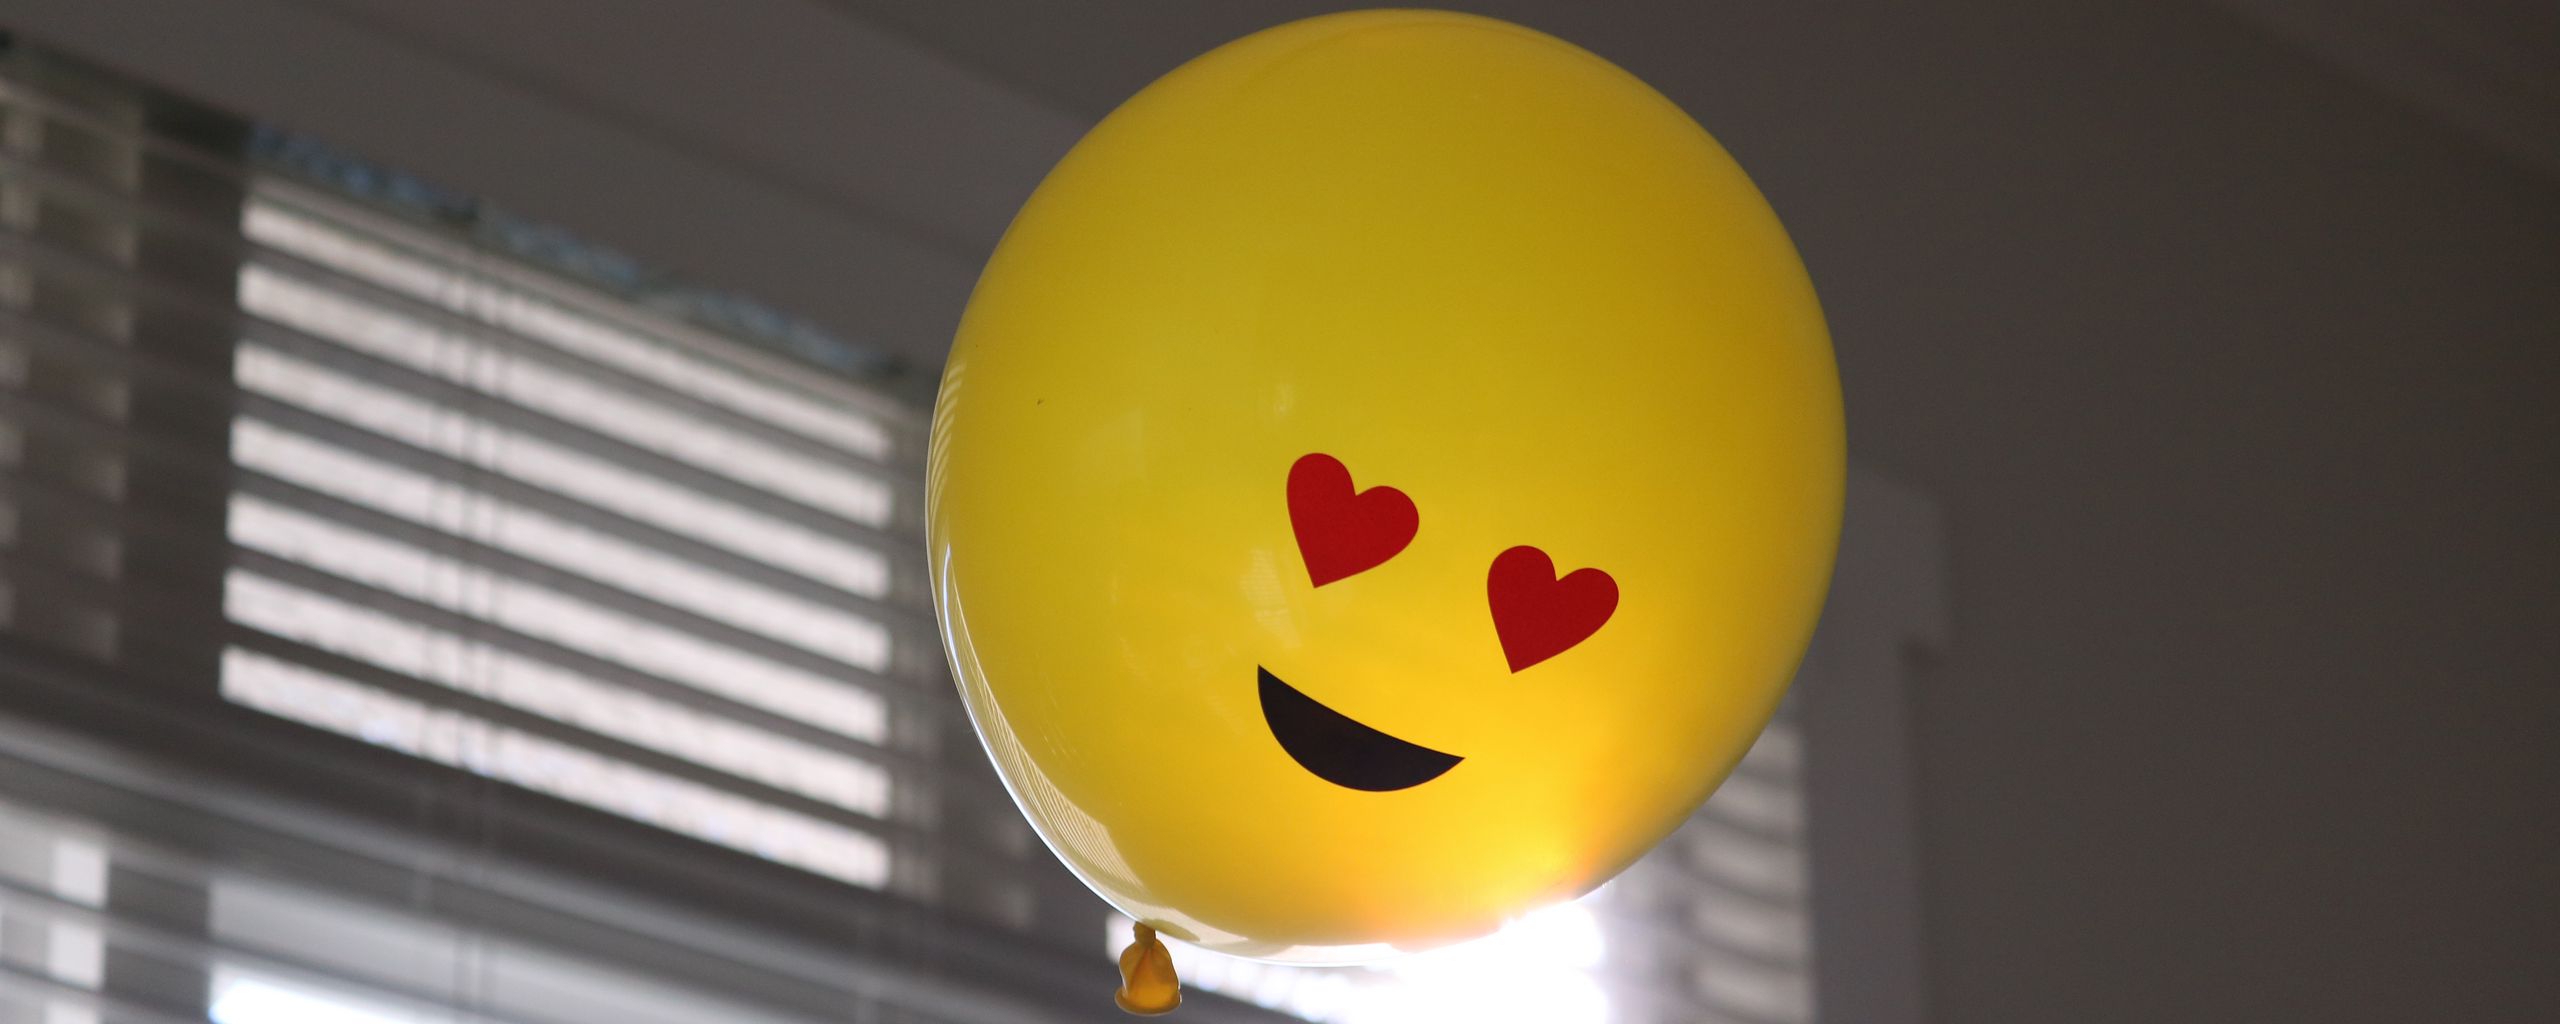 2560x1024 Wallpaper balloon, smiley, smile, happiness, love